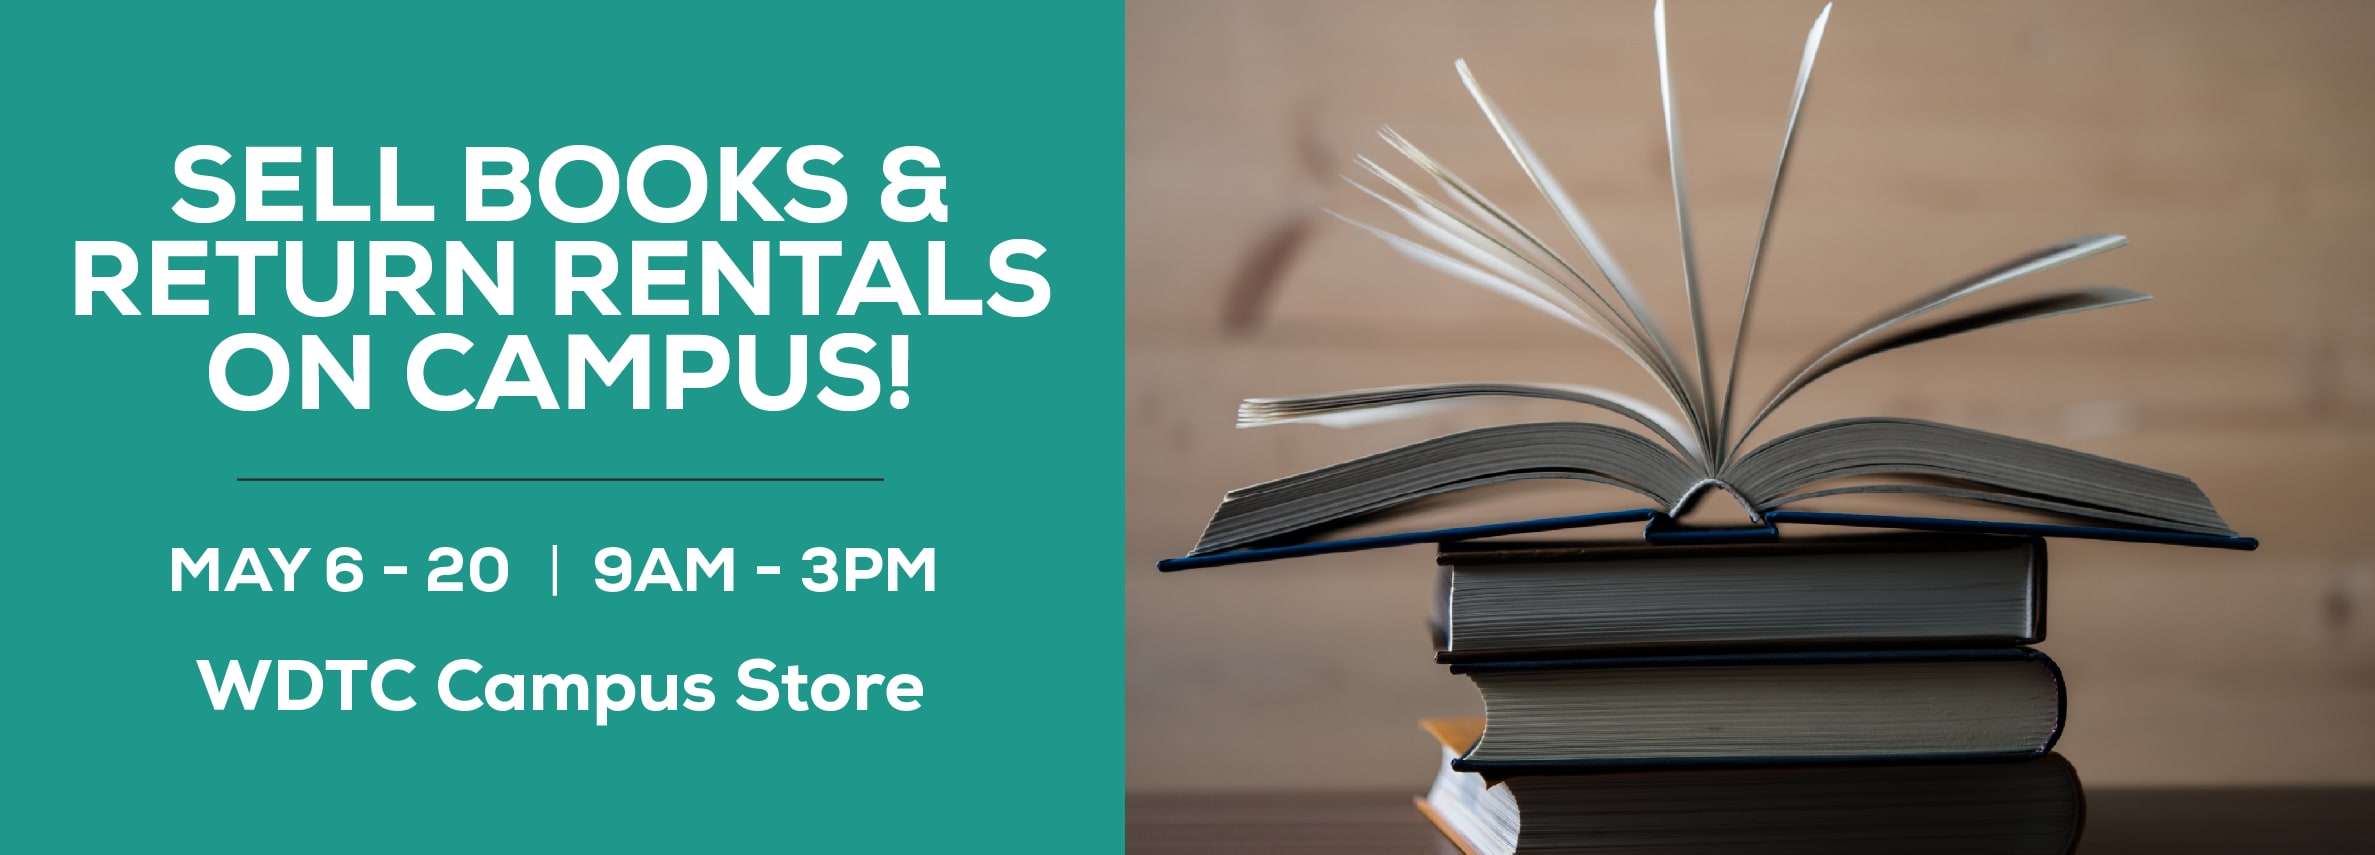 Sell books and return rentals on campus! May 6 through 20. 9am to 3pm at the WDTC Campus Store.